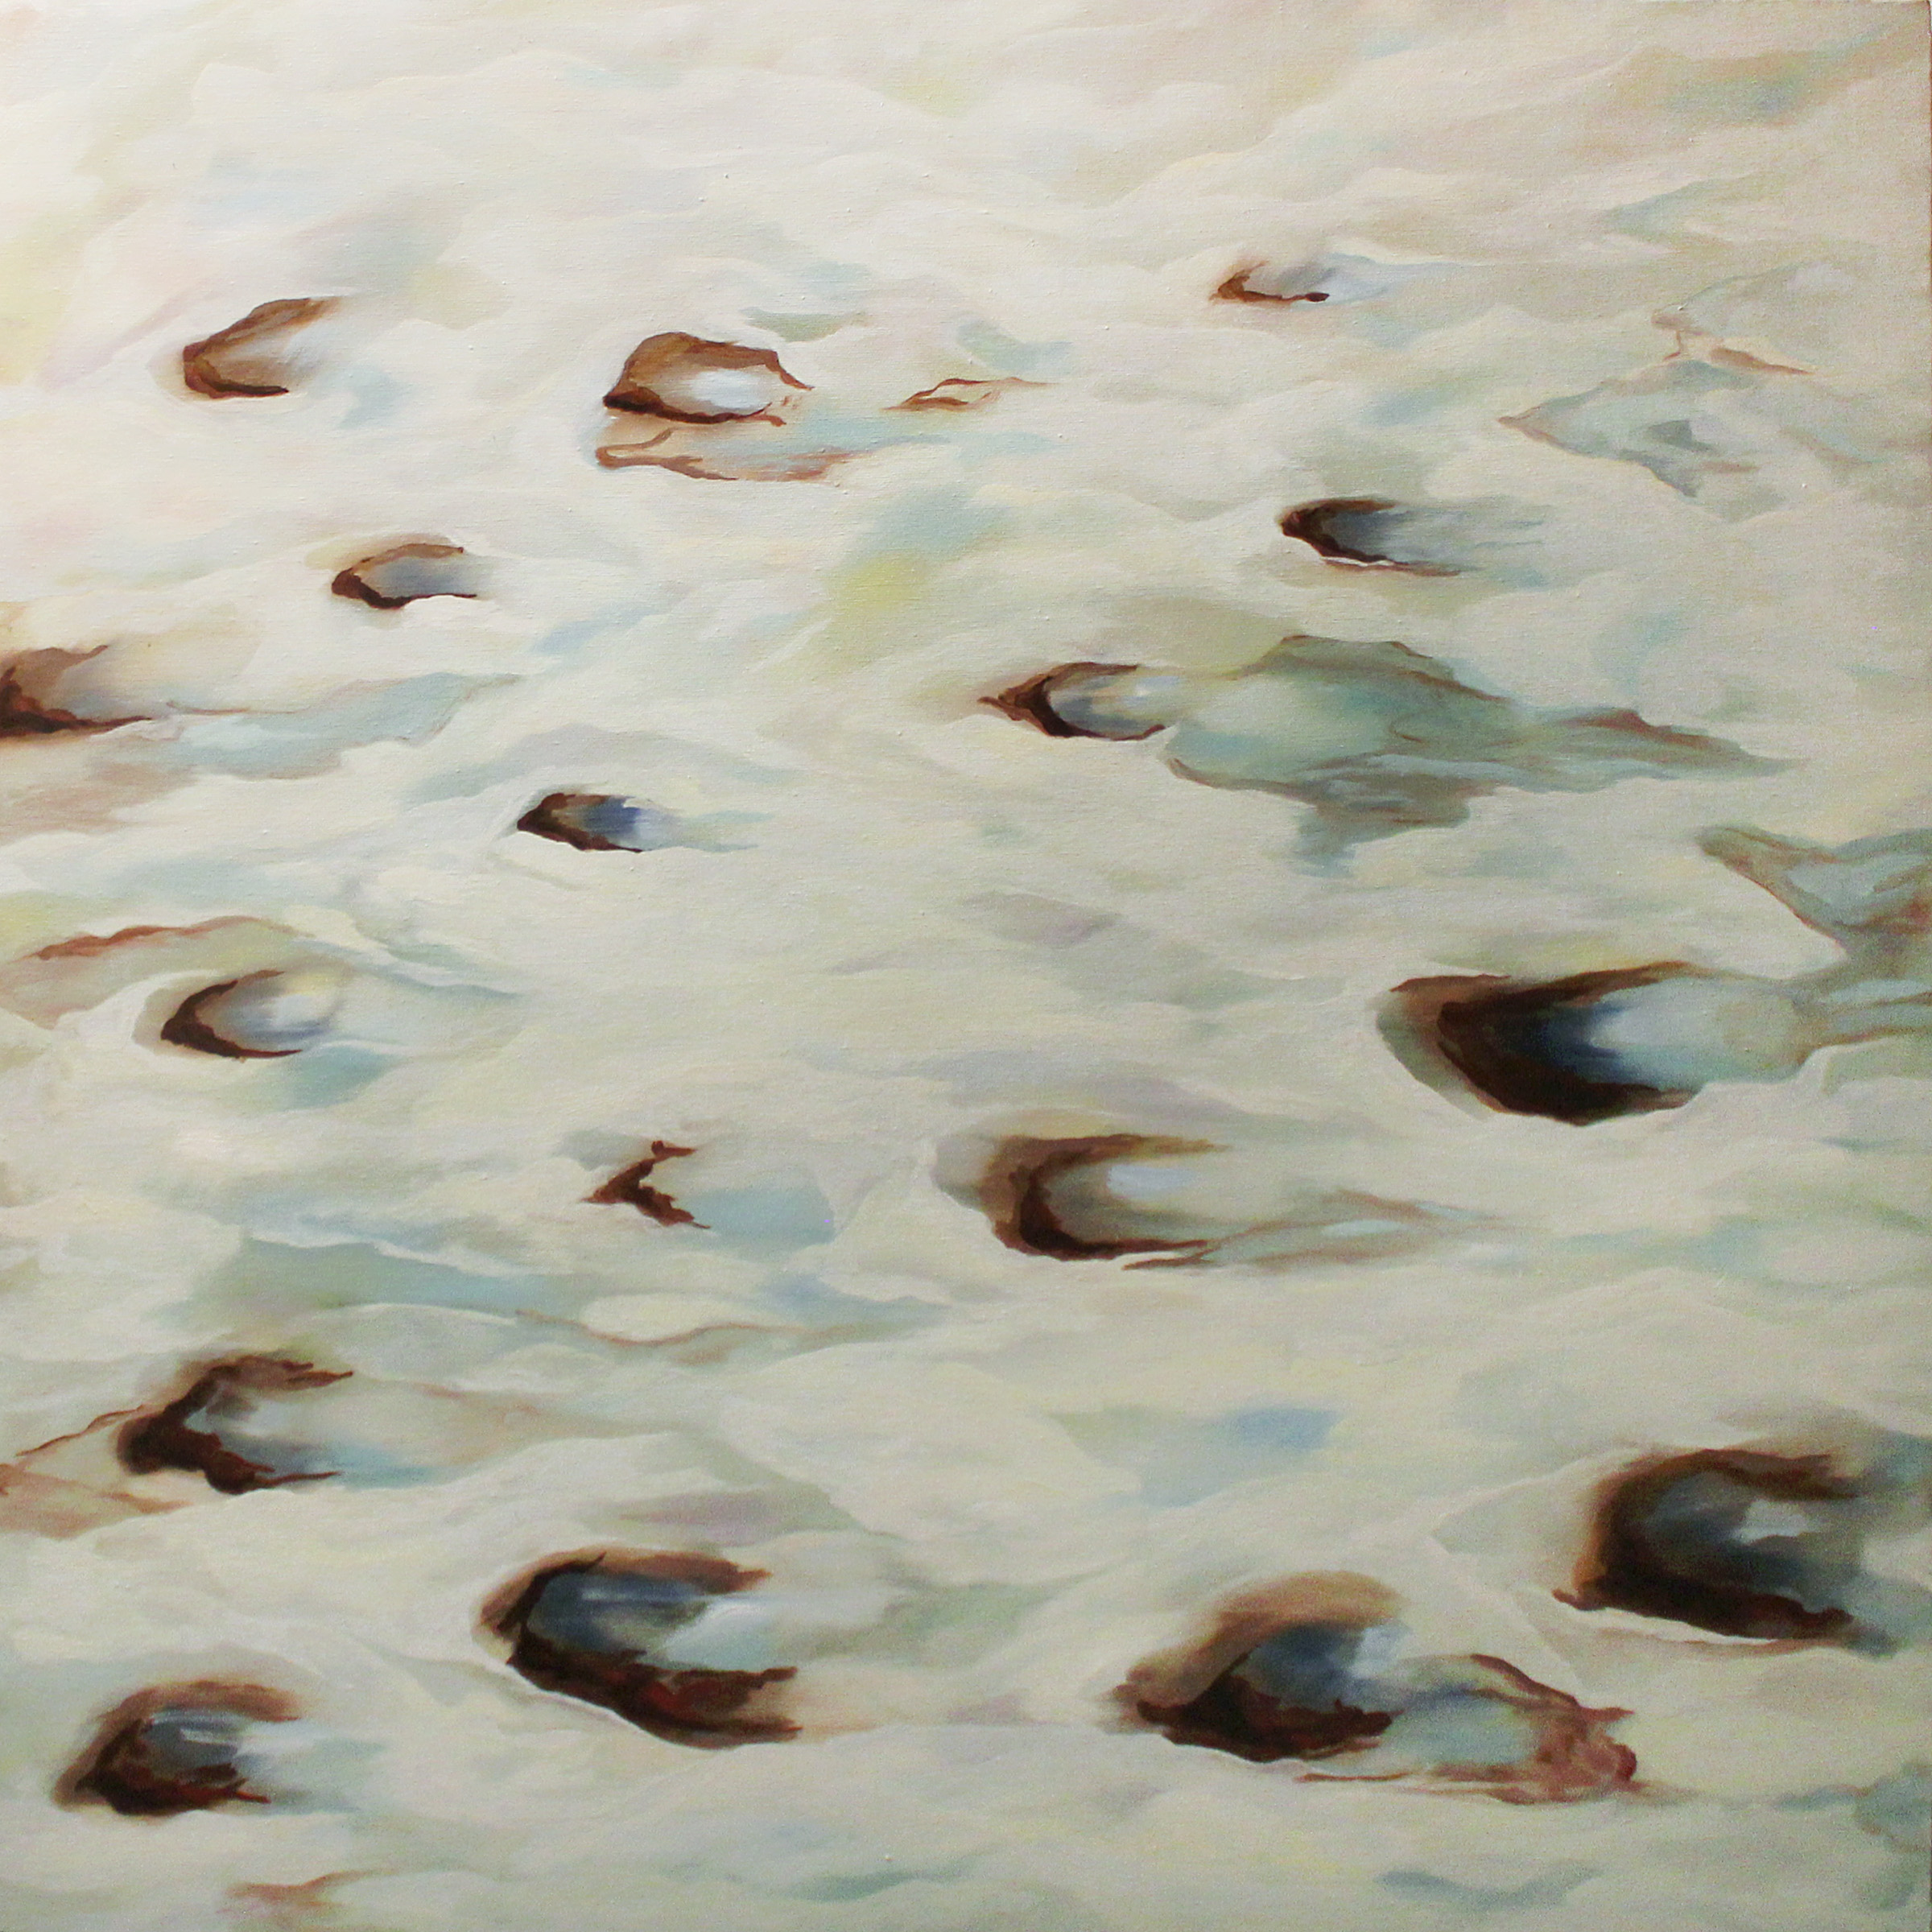 Thawing Tracks, 2009, 30 x 30", oil on canvas